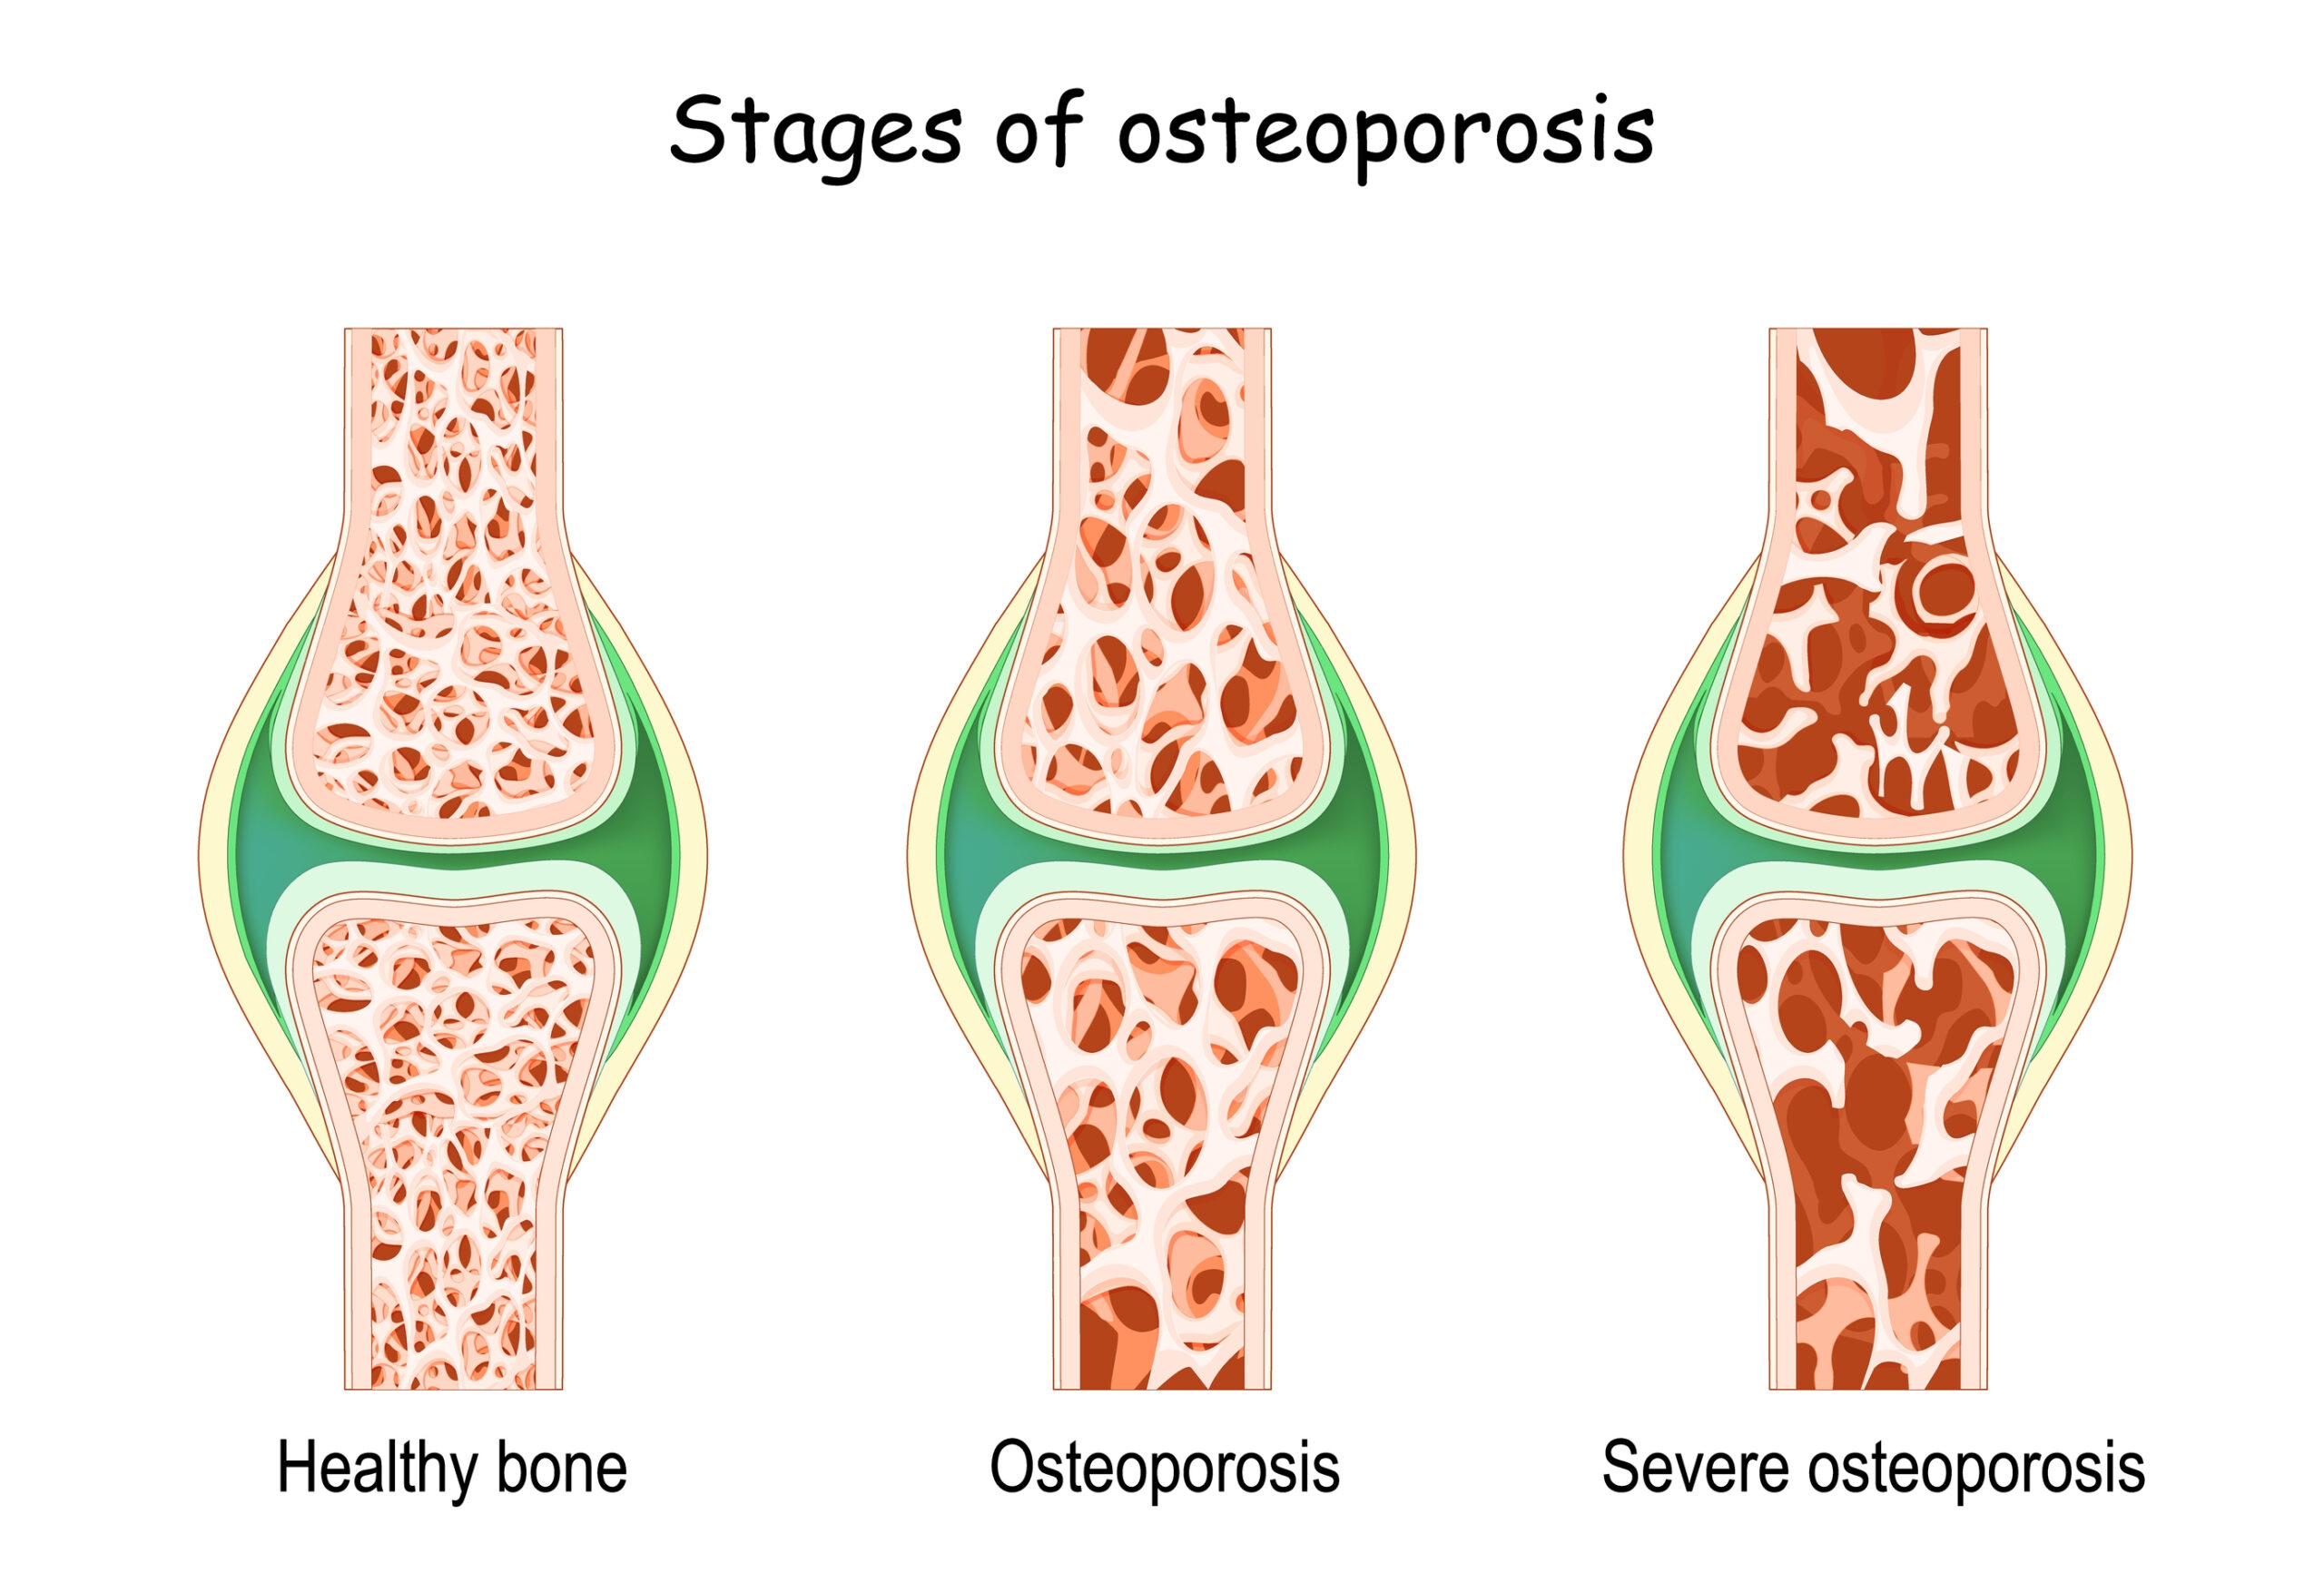 Stages of osteoporosis